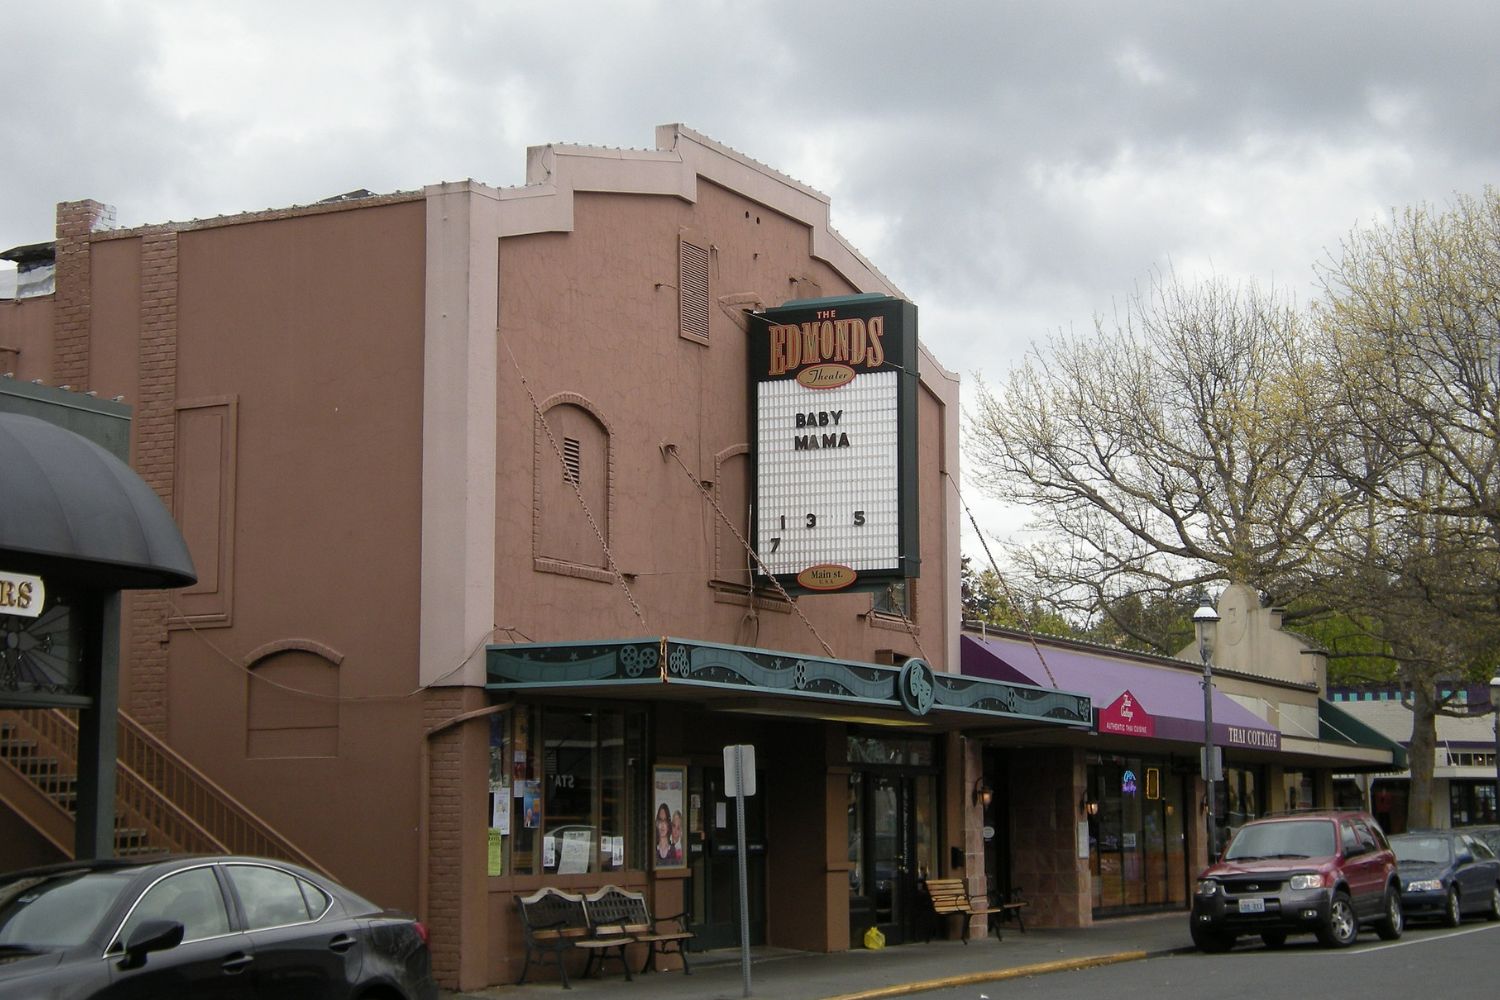 Edmonds Theater, Joe Mabel, CC BY-SA 3.0 <http://creativecommons.org/licenses/by-sa/3.0/>, via Wikimedia Commons